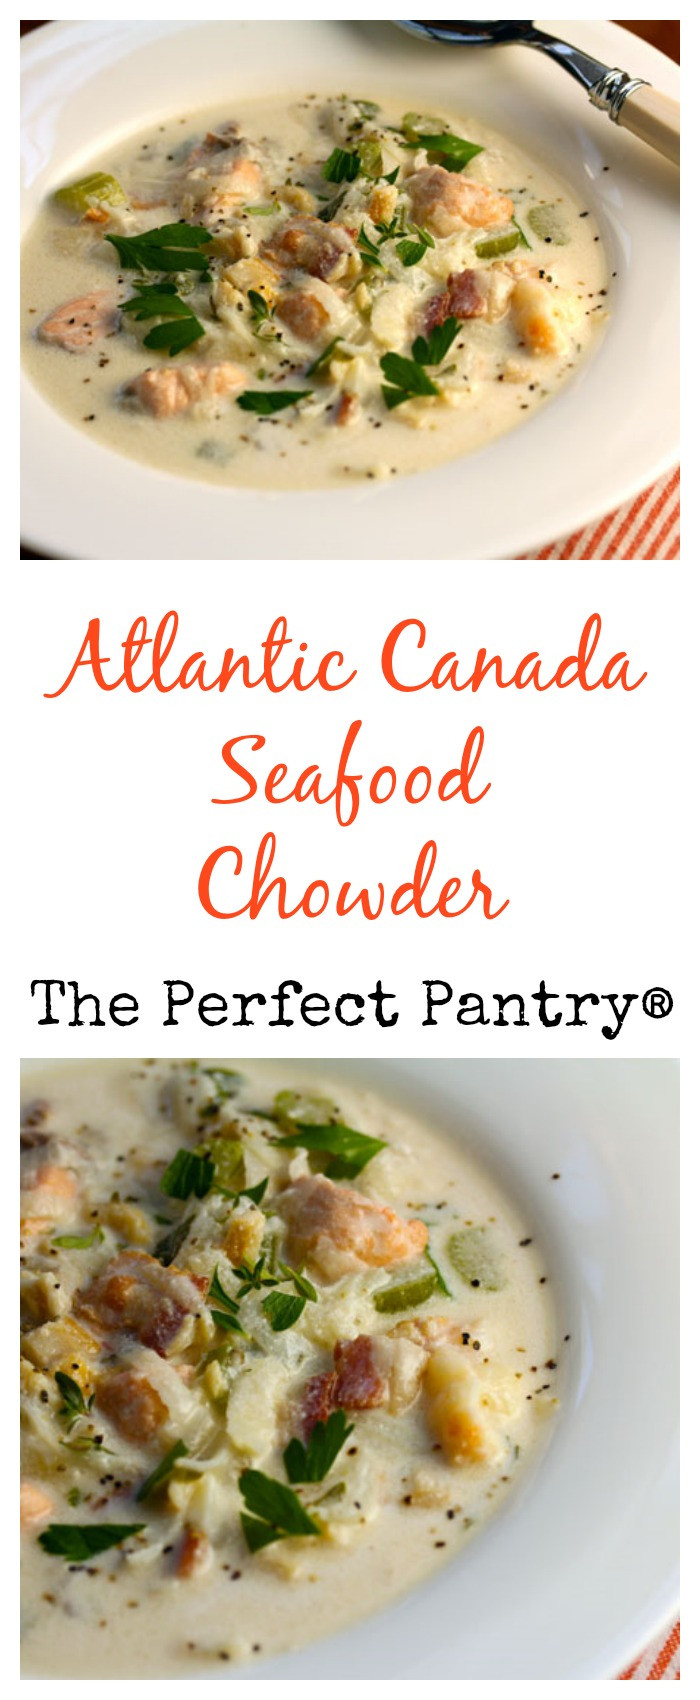 Fish Chowder With Evaporated Milk
 The Perfect Pantry Atlantic Canada seafood chowder